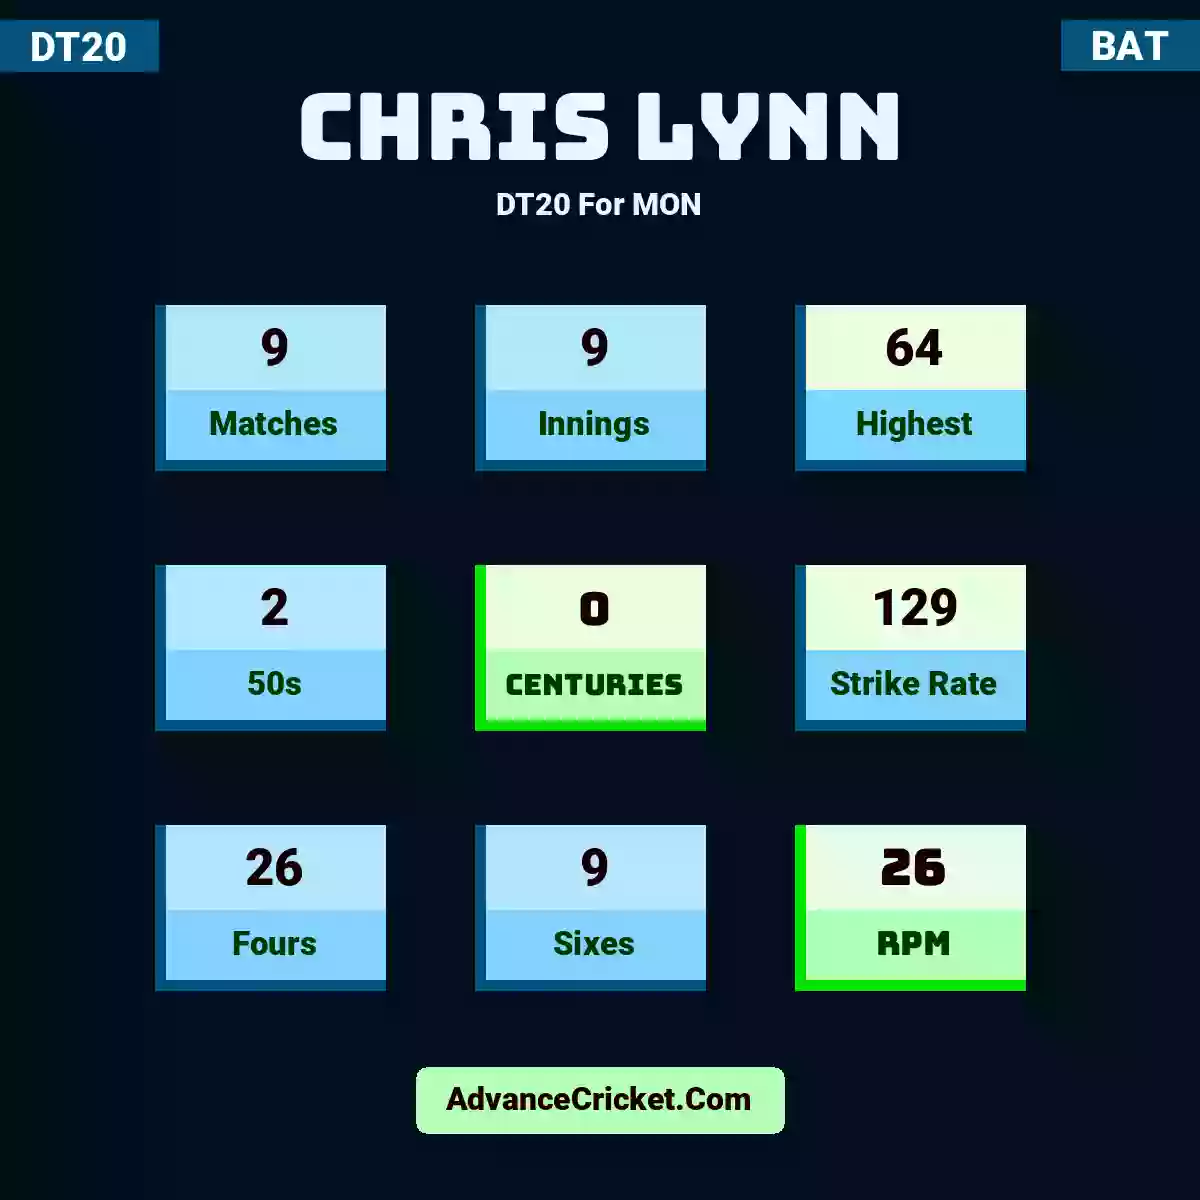 Chris Lynn DT20  For MON, Chris Lynn played 9 matches, scored 64 runs as highest, 2 half-centuries, and 0 centuries, with a strike rate of 129. C.Lynn hit 26 fours and 9 sixes, with an RPM of 26.